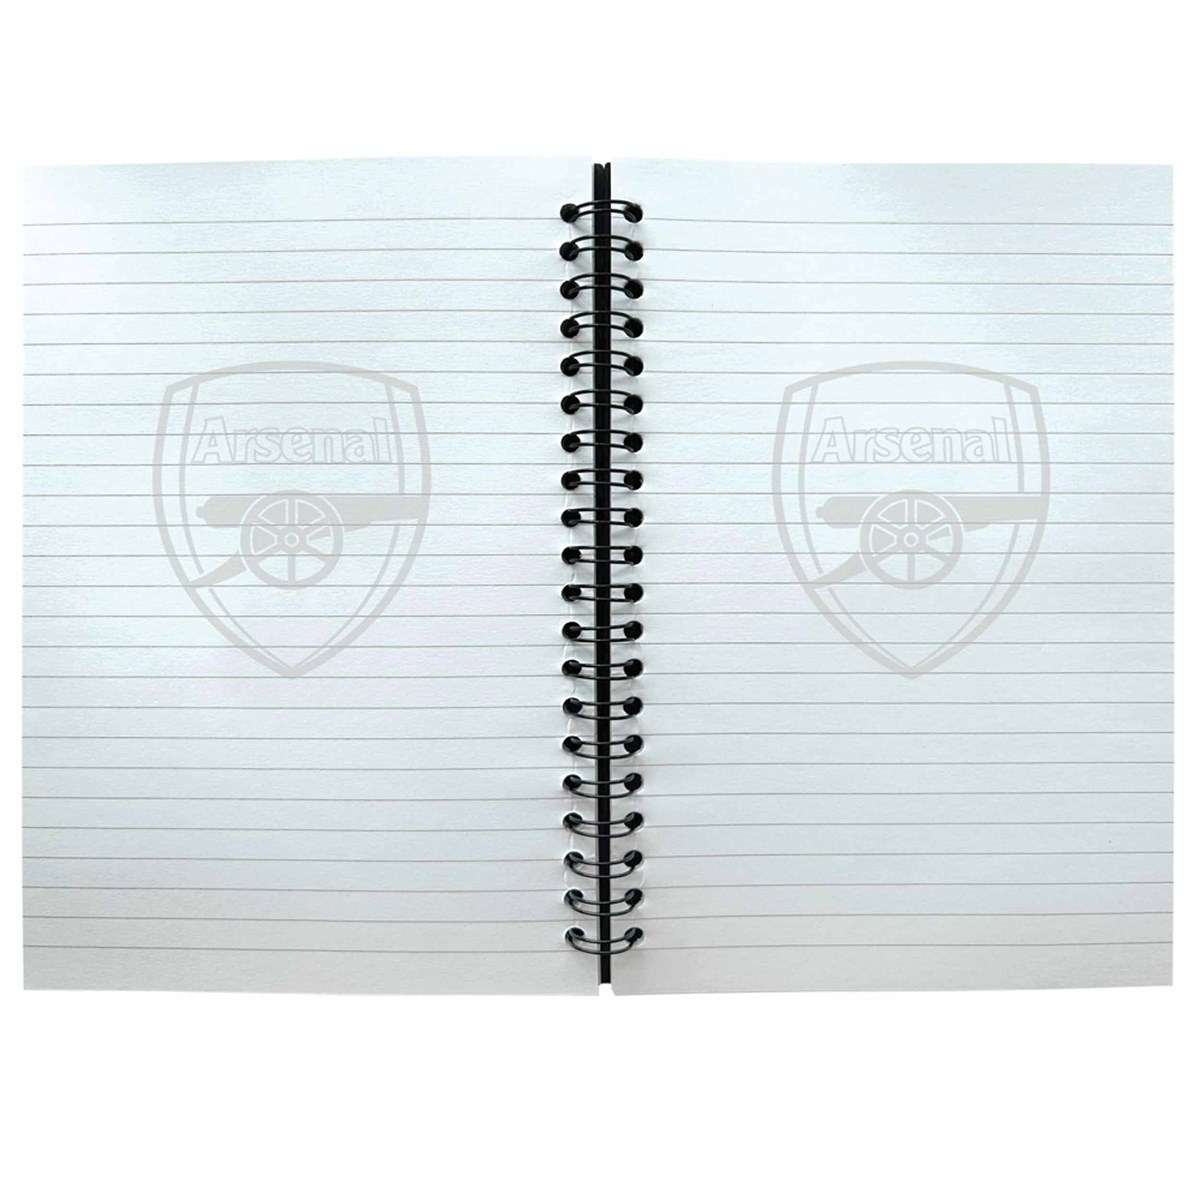 We Love You Arsenal We Do: Football Notebook for Arsenal Football Fans, Wide Ruled 6x9, Soccer Notepad Journal Log Book